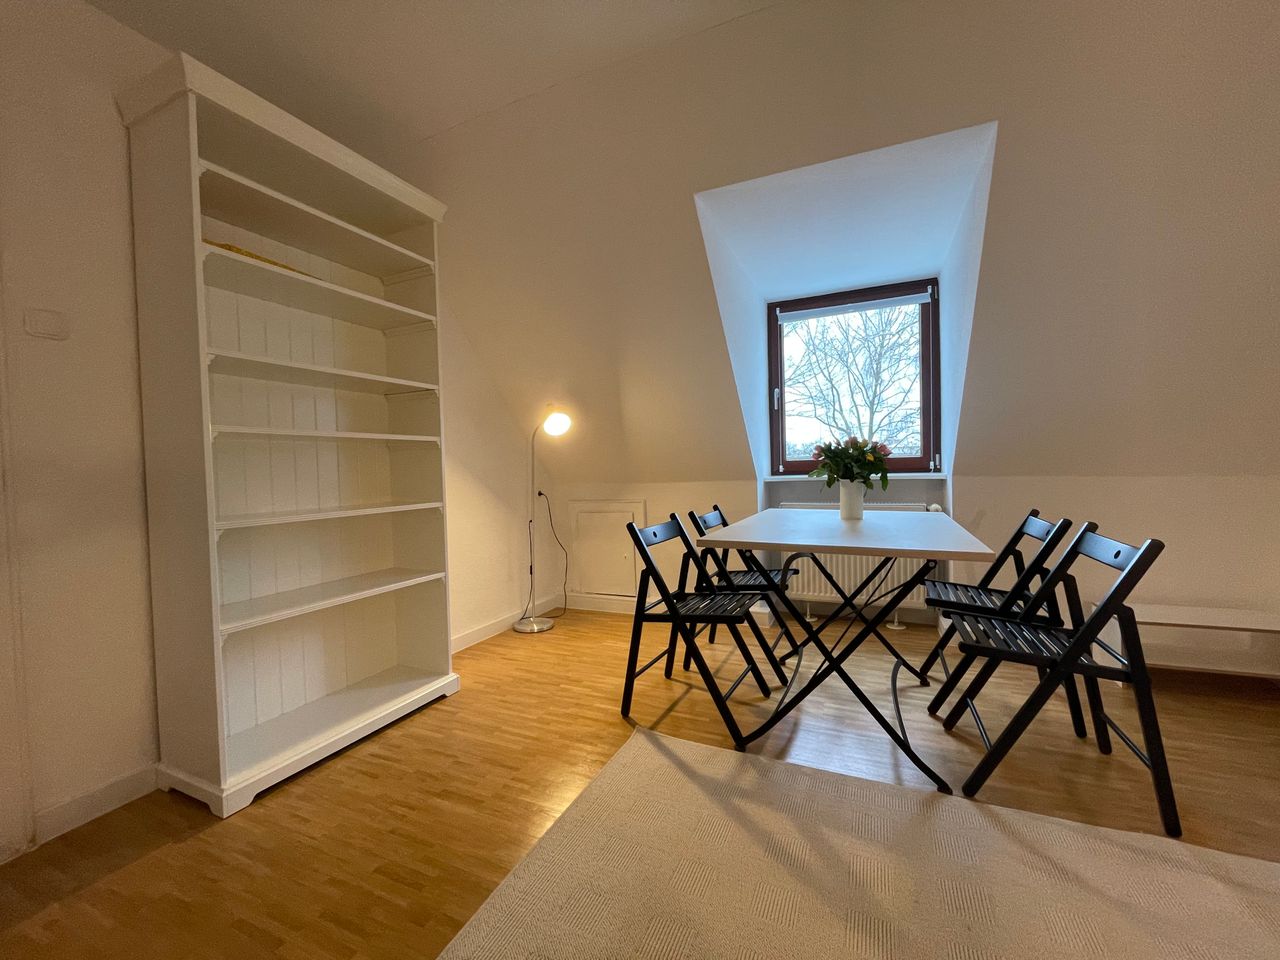 Quiet apartment (Hannover), near the lake and city forest